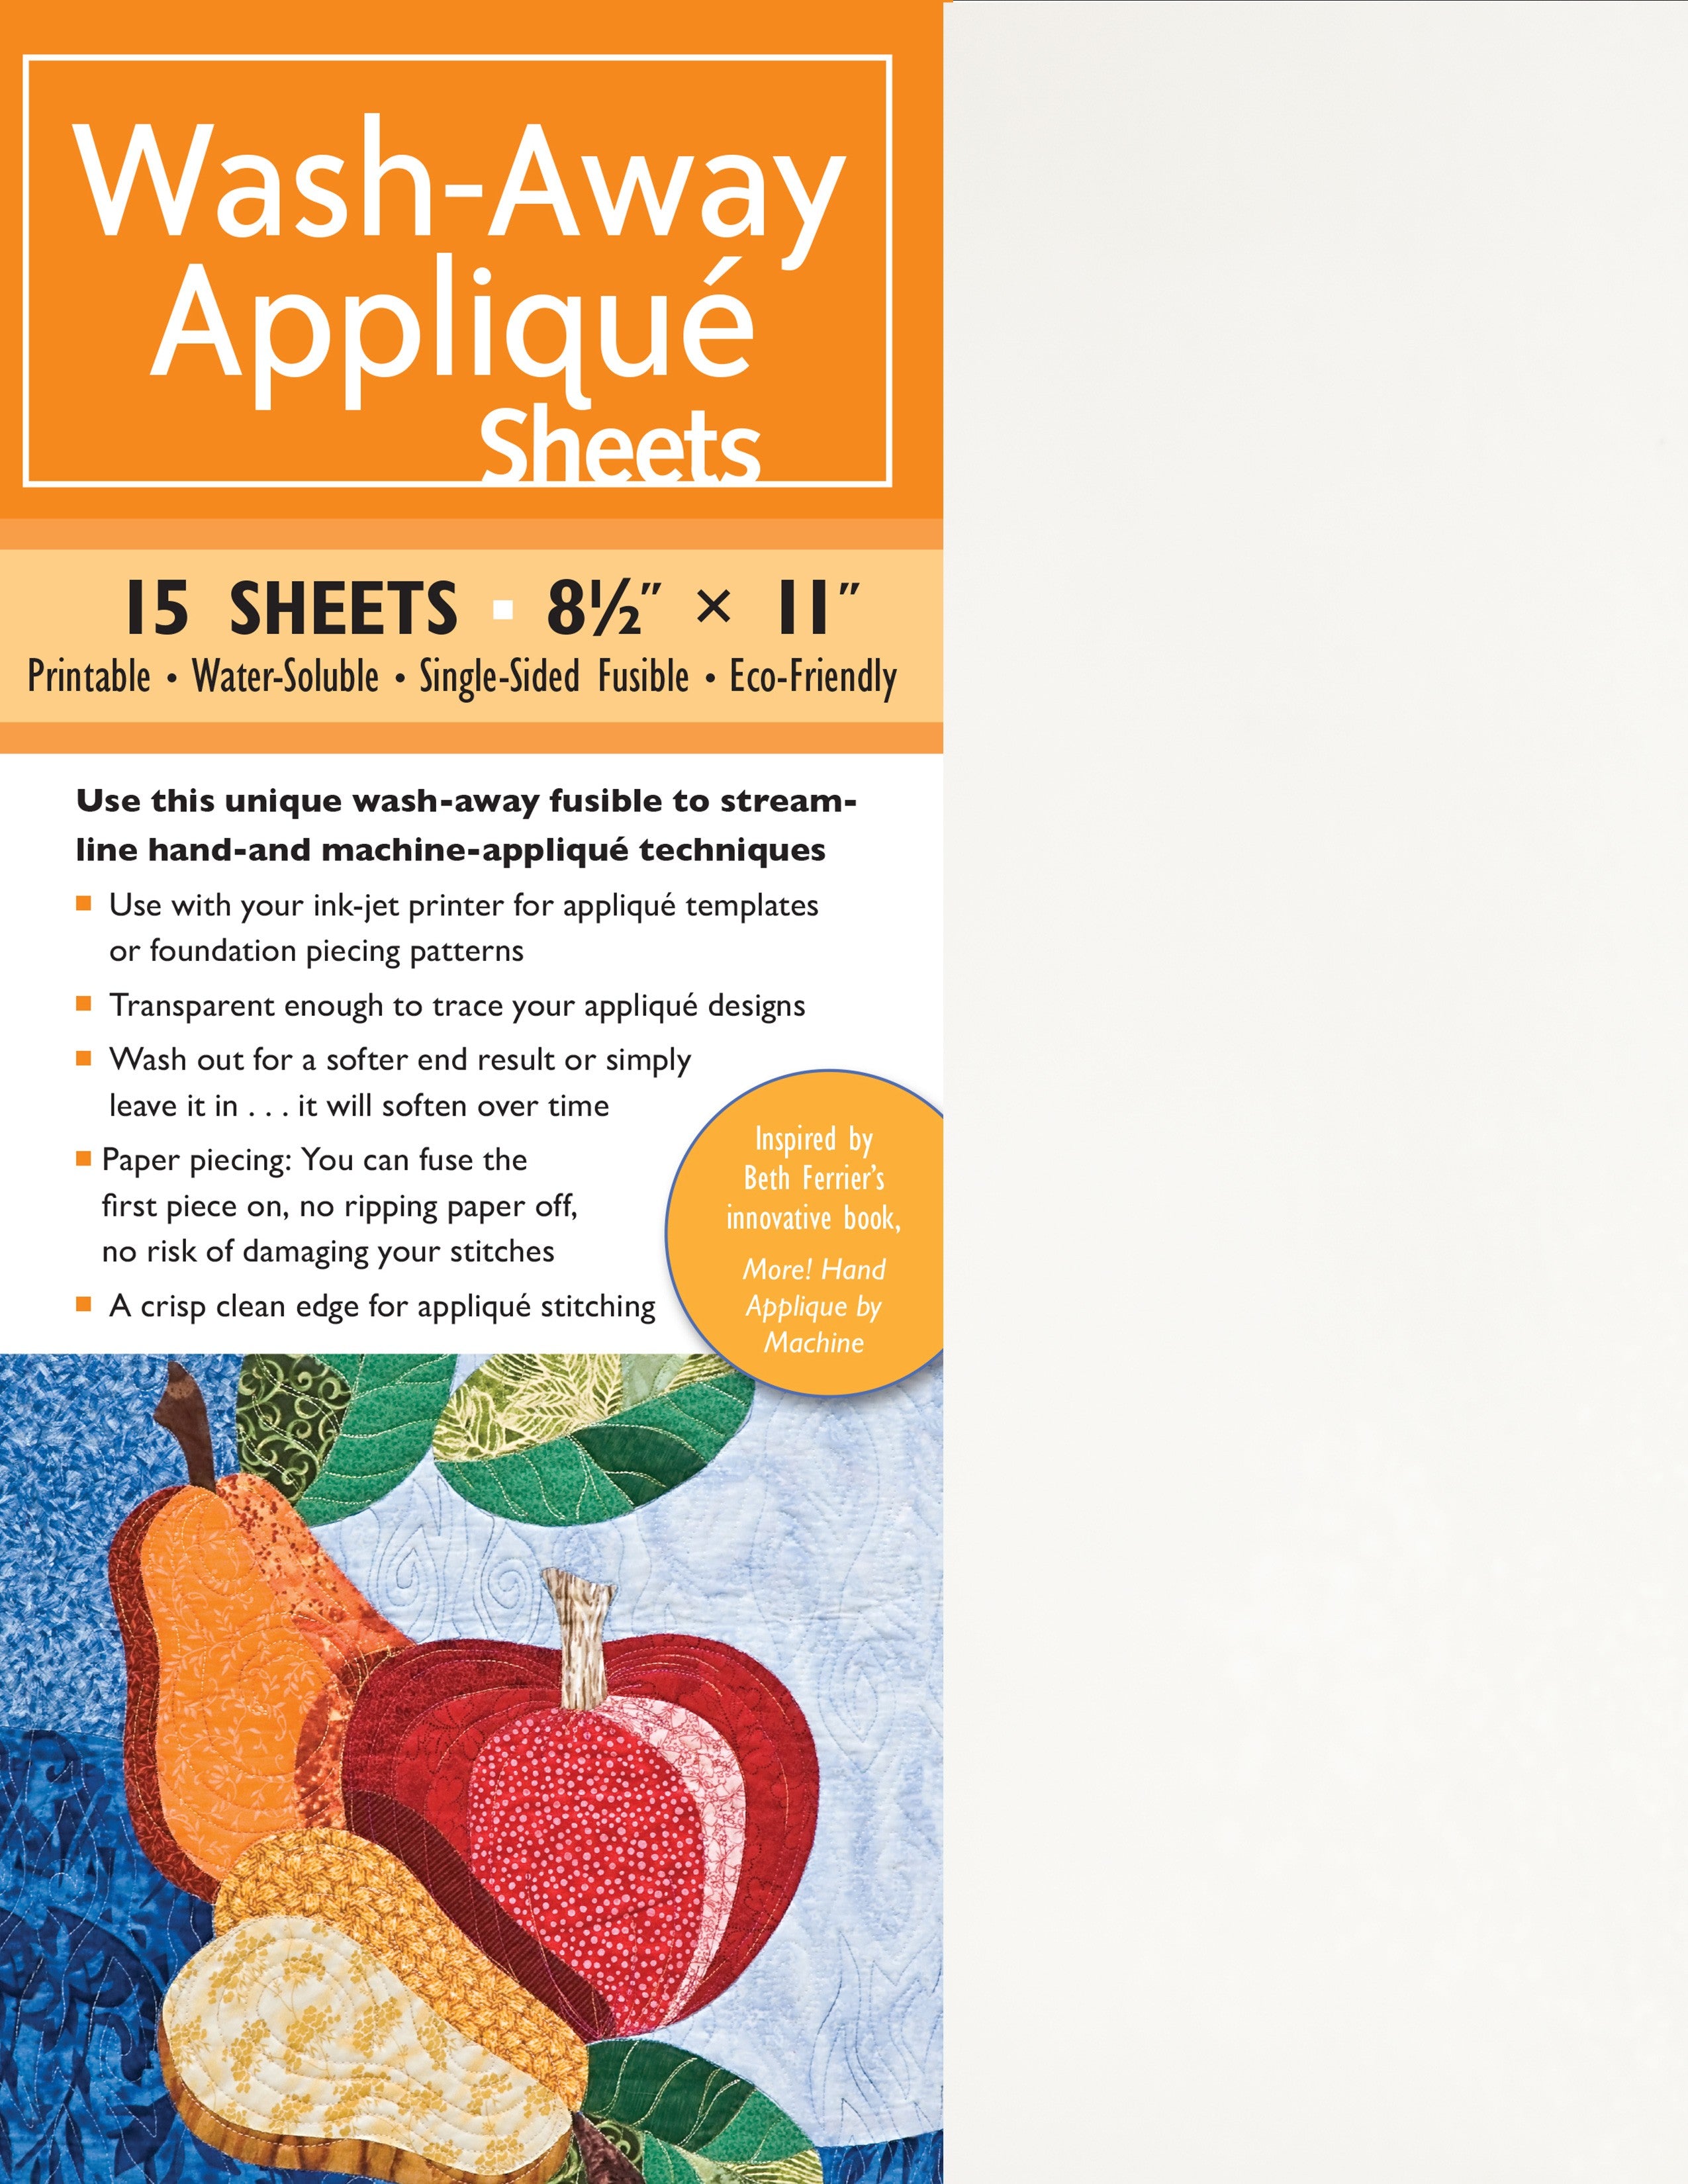 Wash-Away Applique Sheets - Print with Inkjet Printer